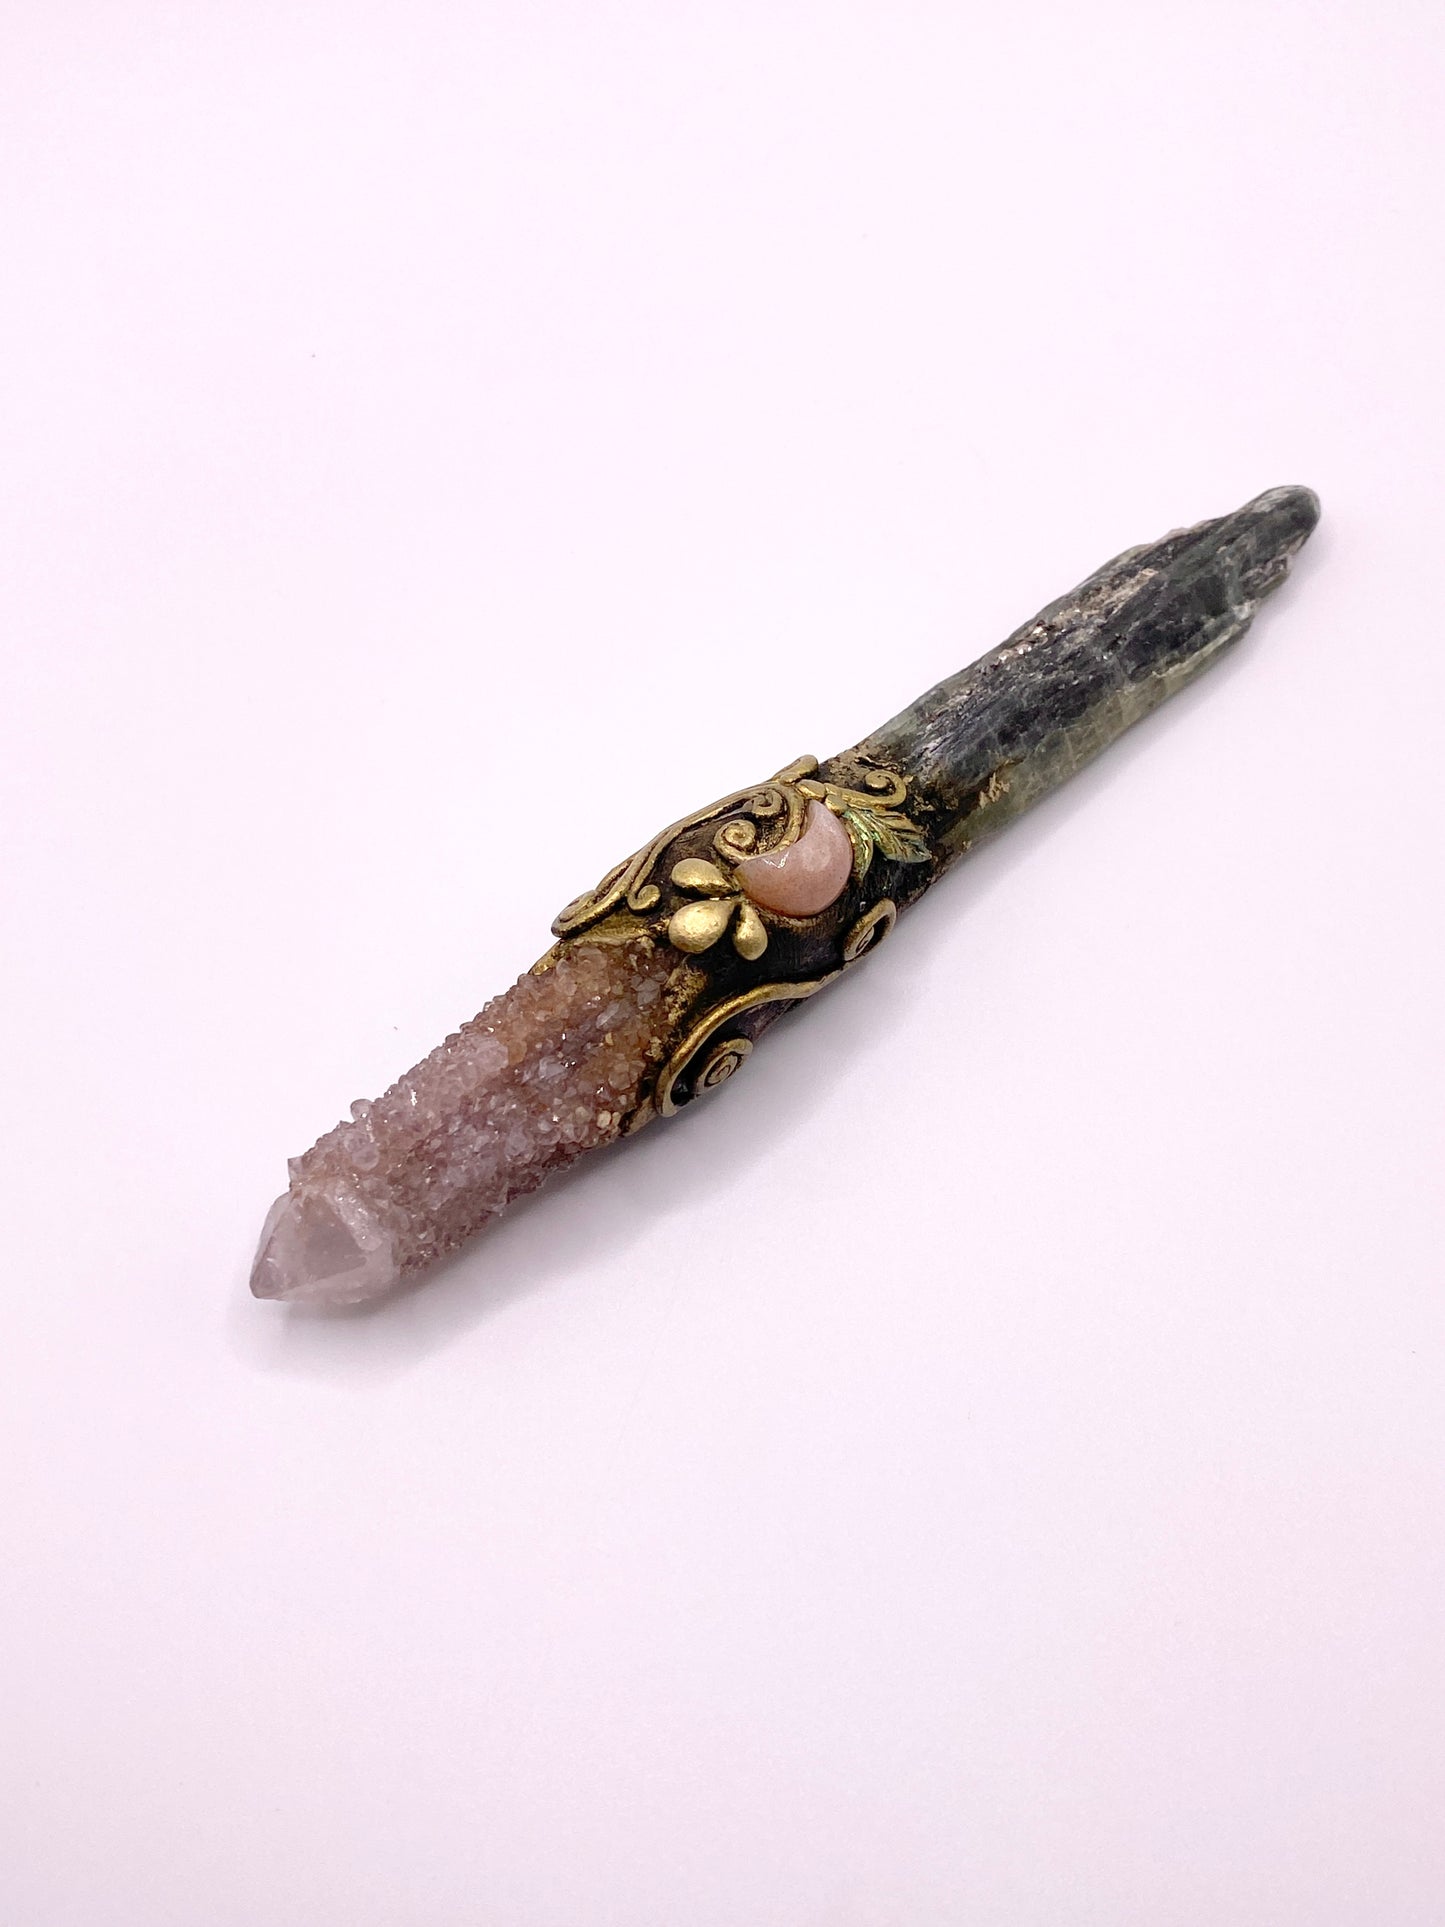 Crystal Energy Wand with Amethyst Spirit Quartz, Green Kyanite and Peach Moonstone Crescent - Reversible Metaphysical Wand